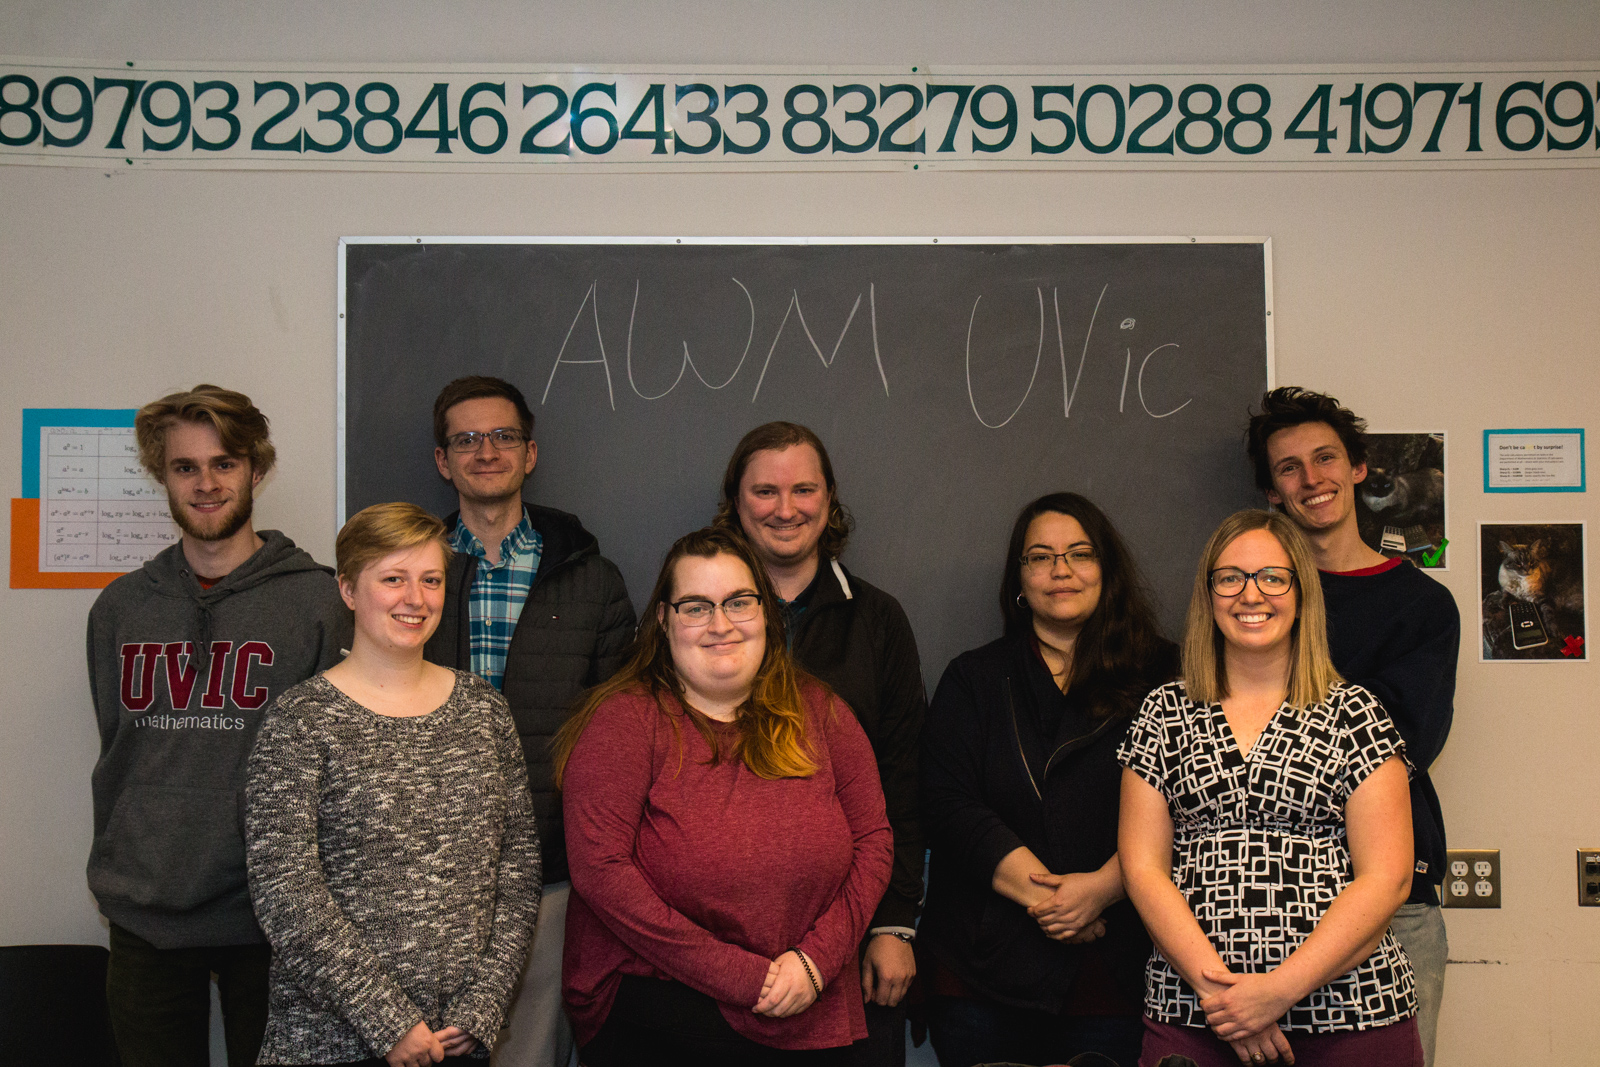 Members of the UVic AWM Student Chapter posed for a photo.